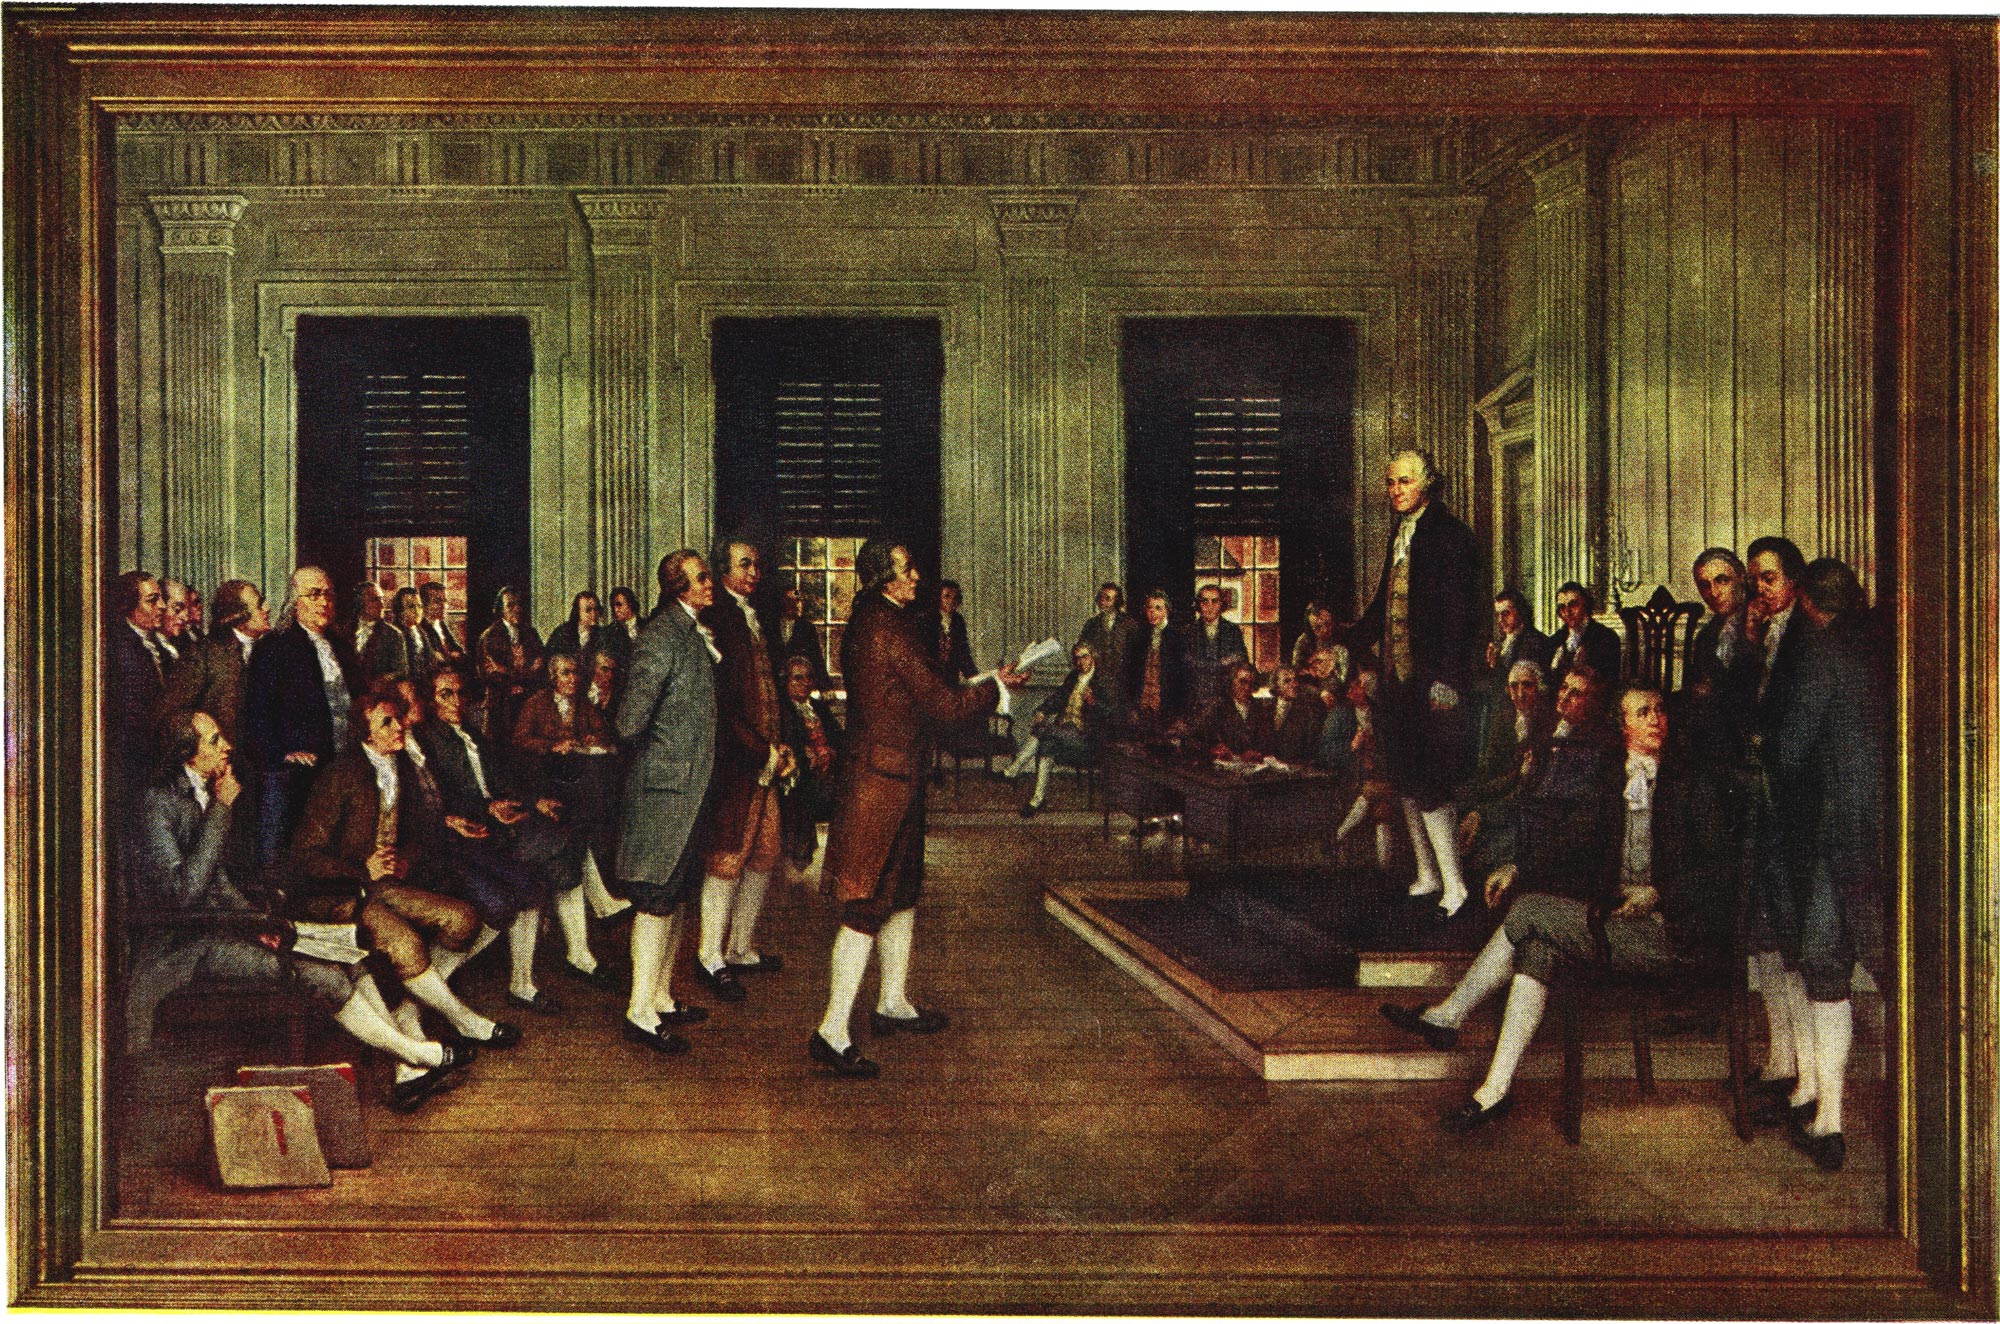 The Adoption of the U.S. Constitution in Congress at Independence Hall, Philadelphia, Sept. 17, 1787 by John H. Froehlich